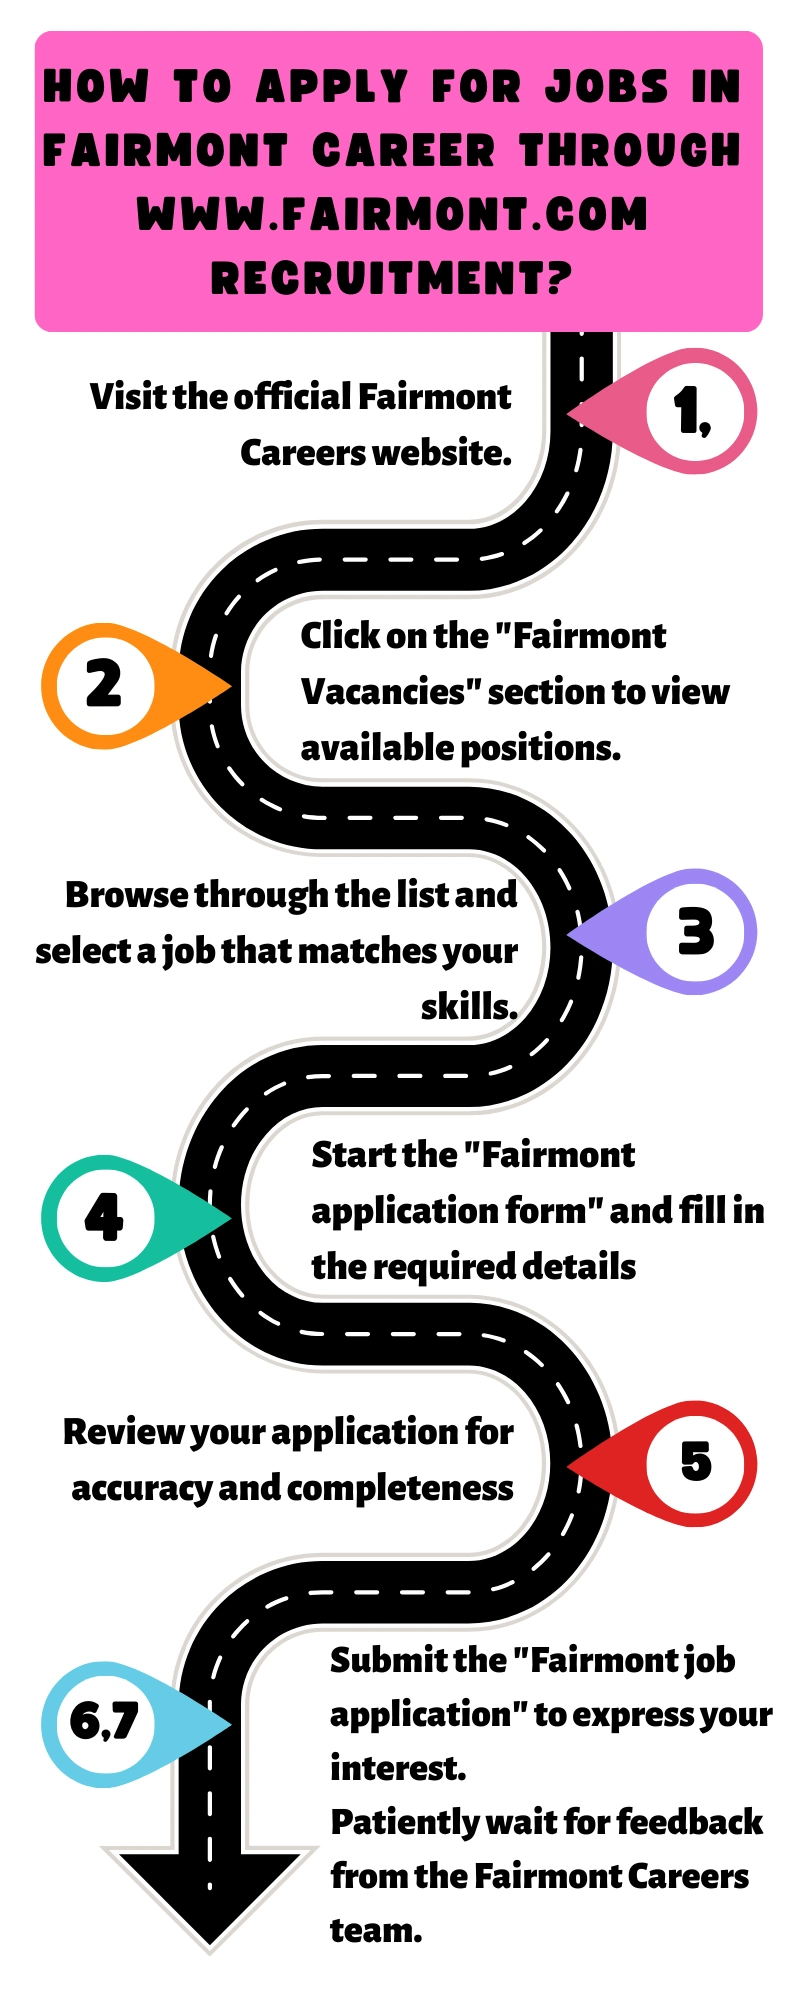 How to Apply for Jobs in Fairmont Career through www.fairmont.com recruitment?